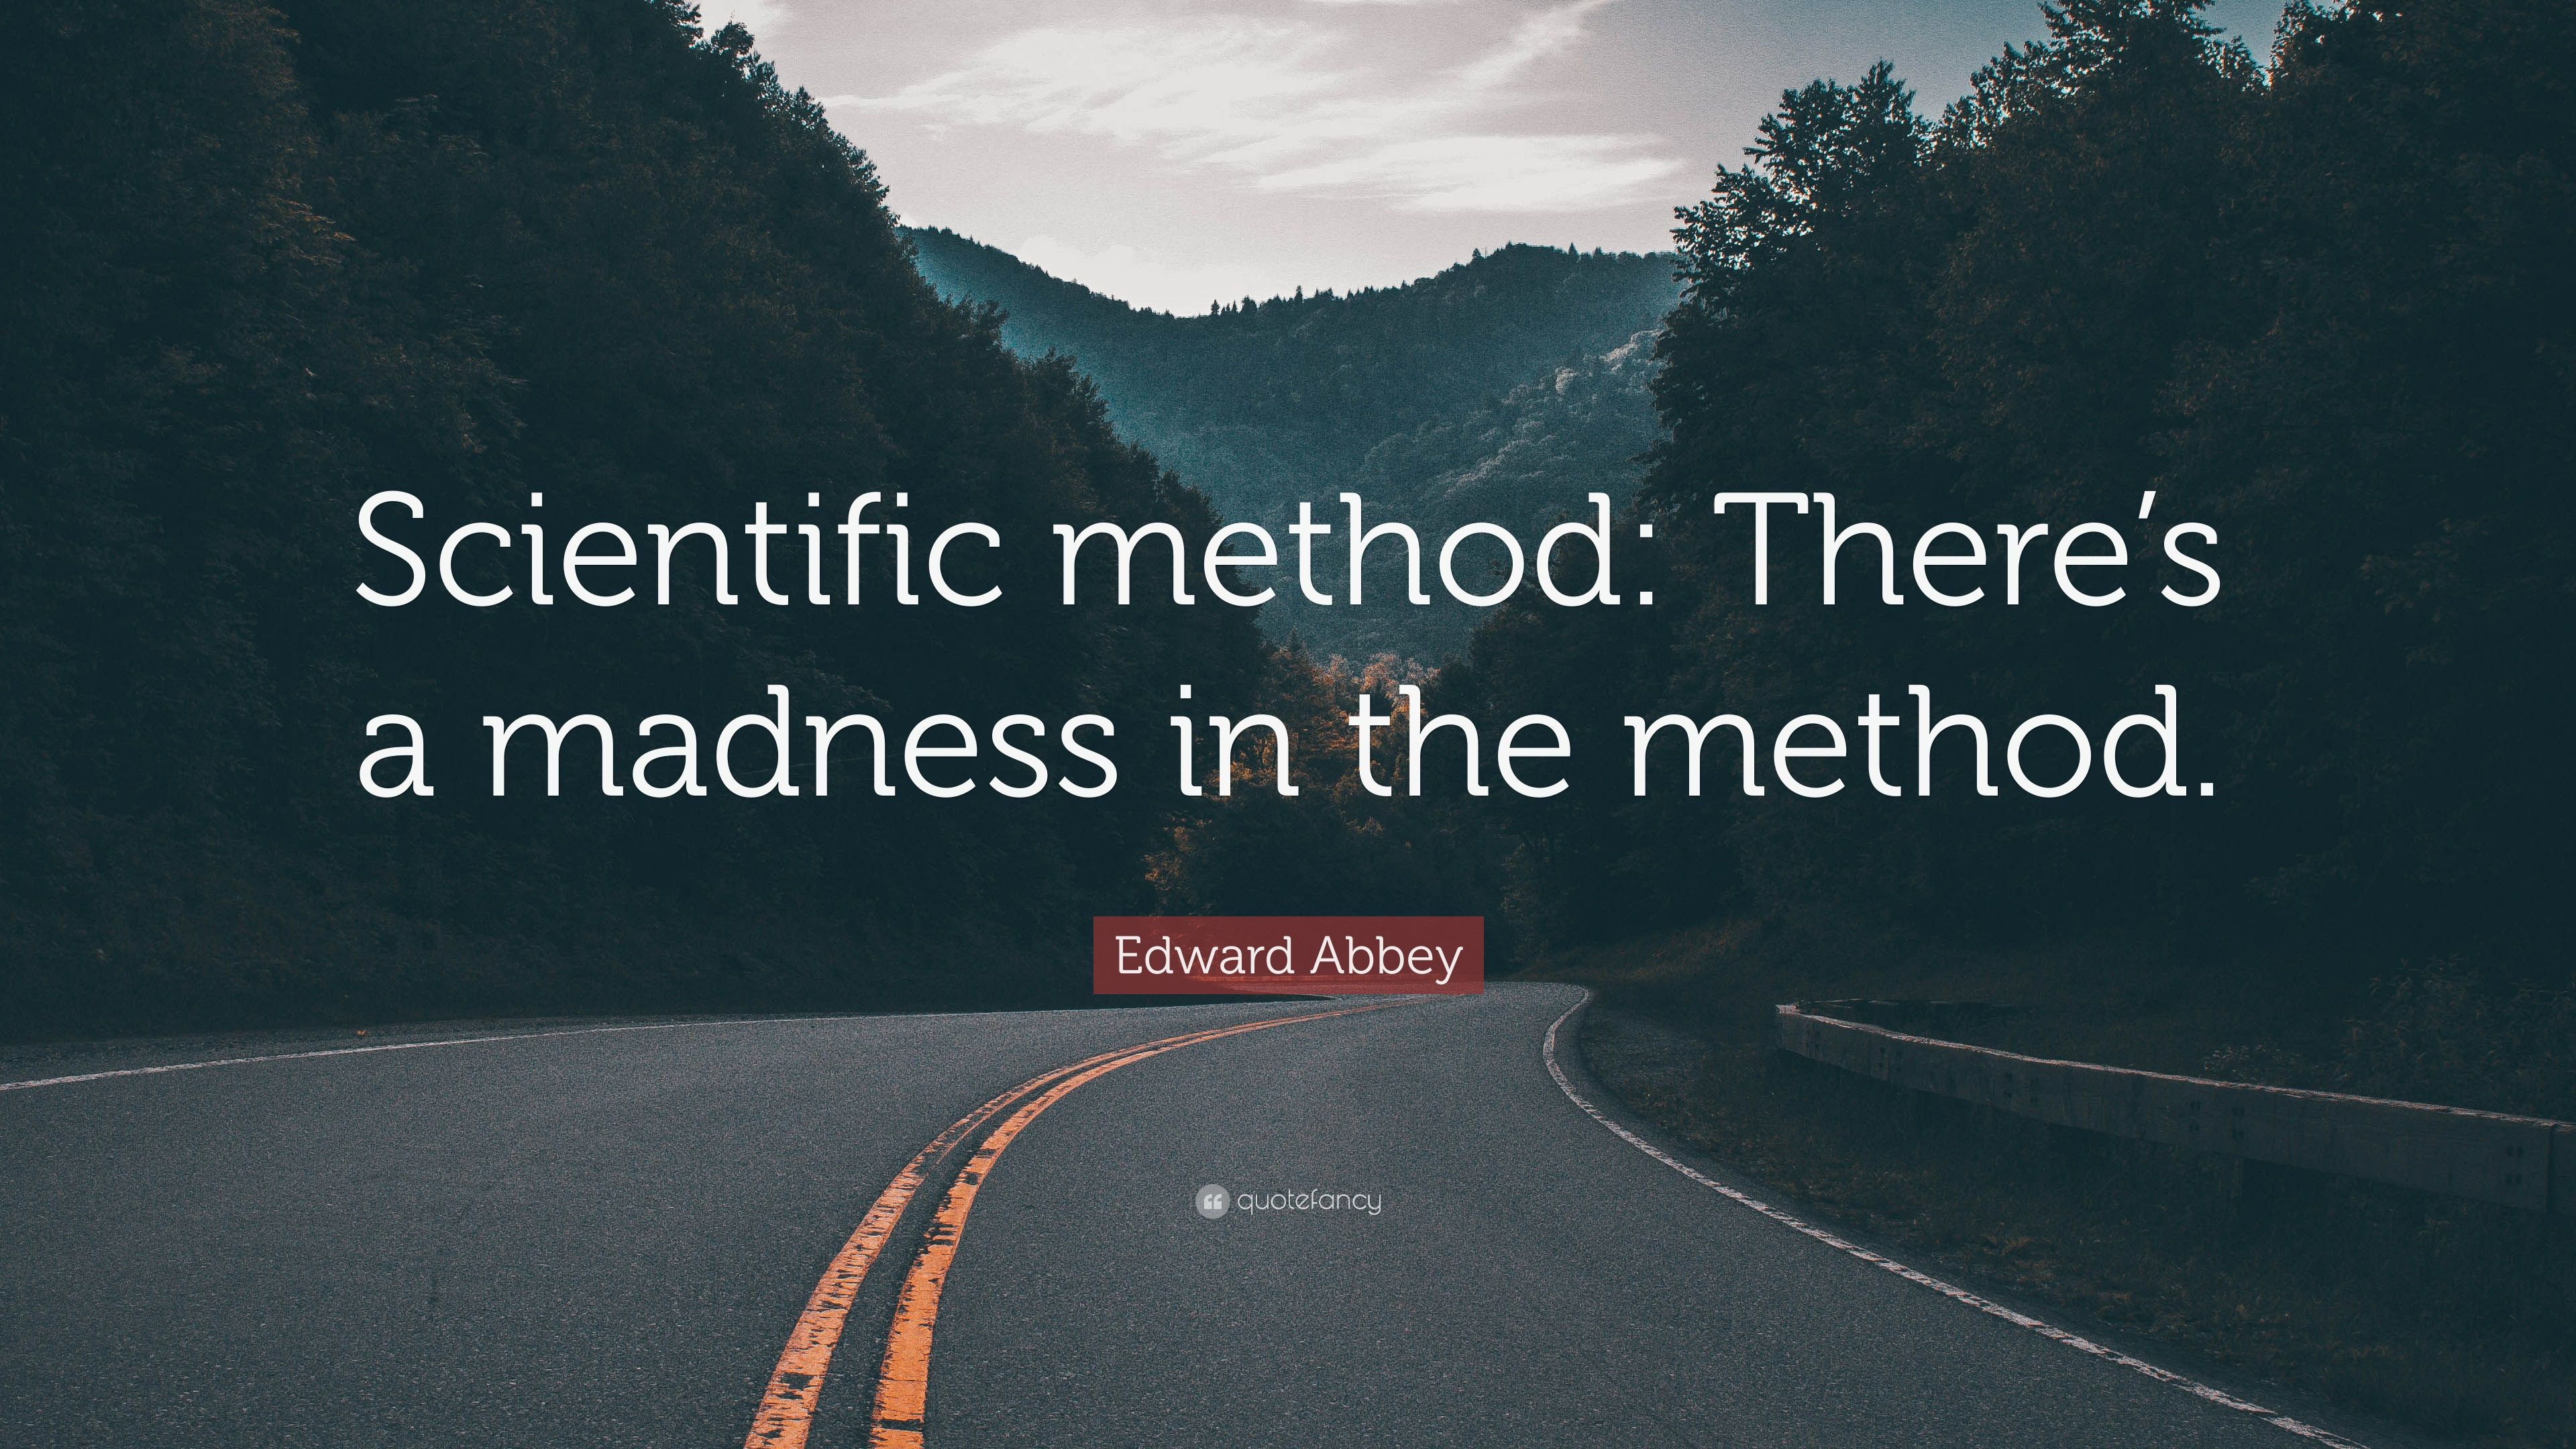 Edward Abbey Quote: “Scientific method: There's a madness in the method.” (7 wallpaper)